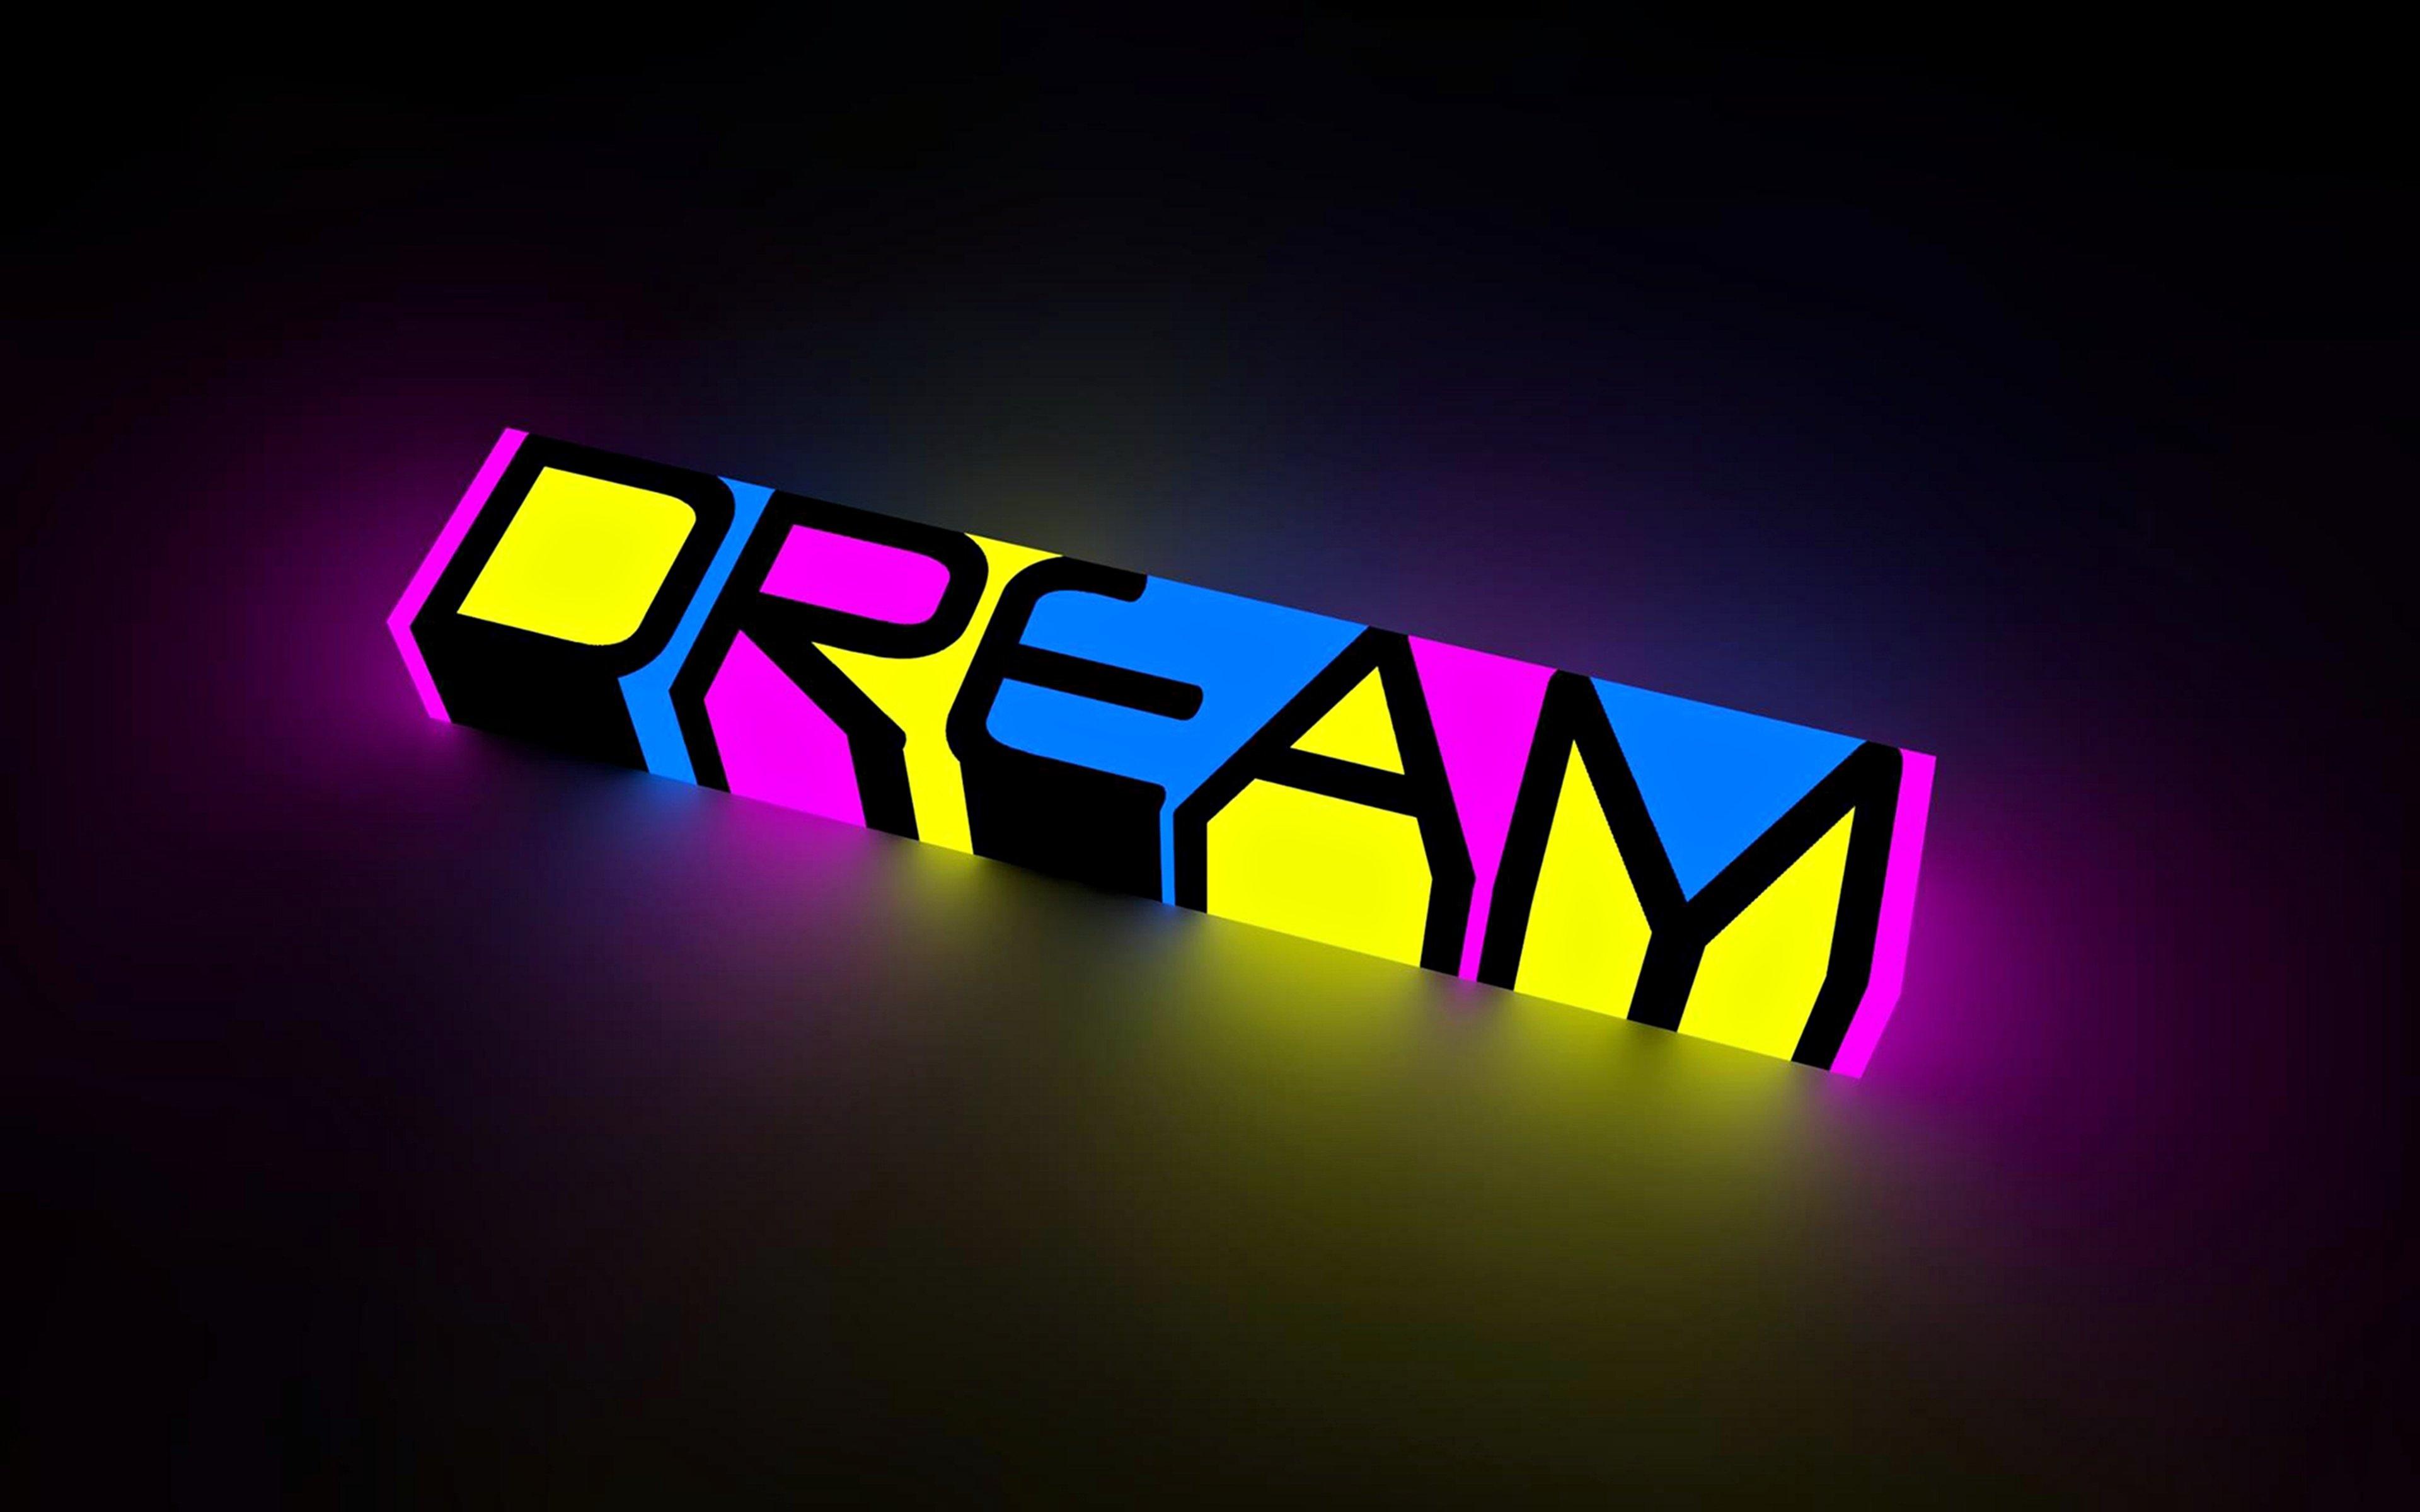 Abstract dream colors neon bright words letters motivational inspiration text statement background wallpapes wallpaperx2400